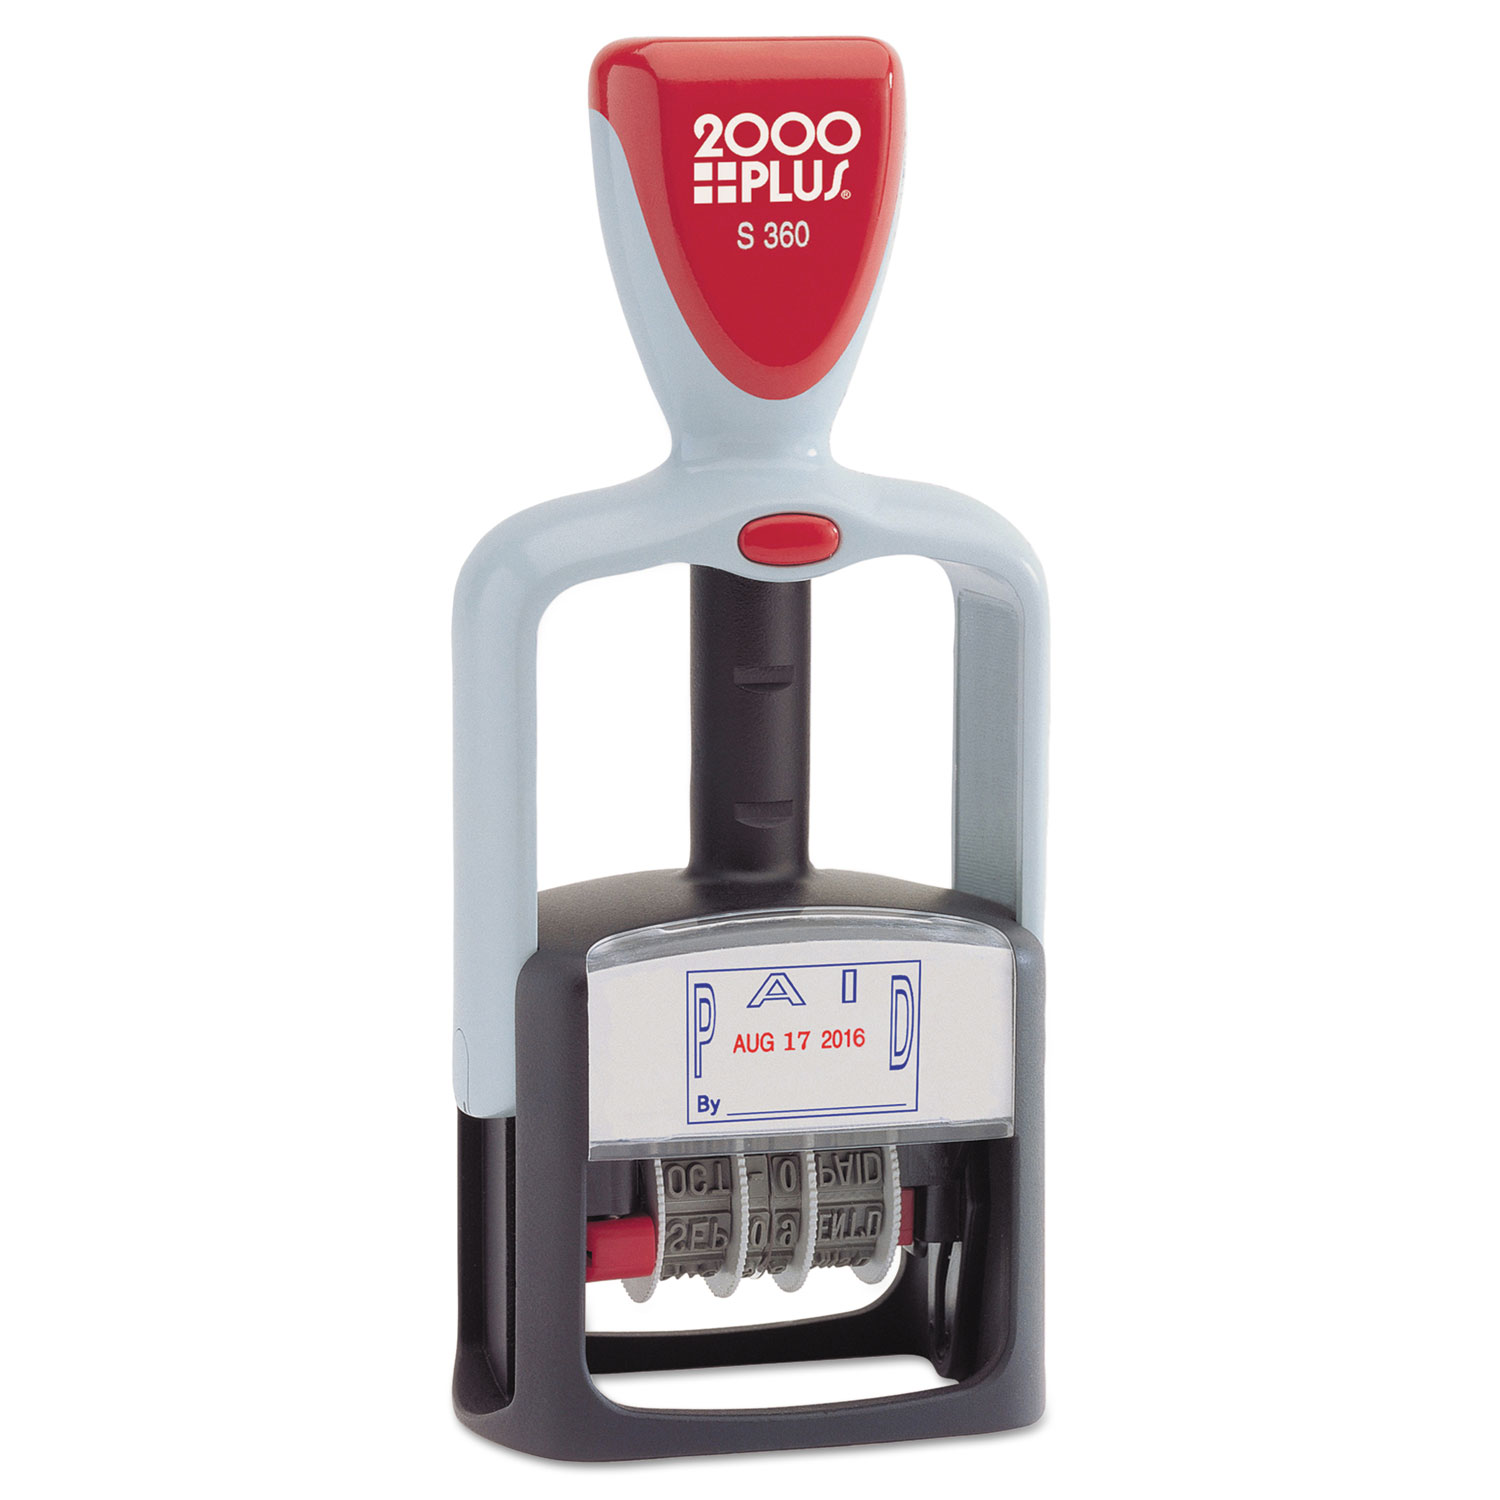  COSCO 2000PLUS 011033 Model S 360 Two-Color Message Dater, 1 3/4 x 1, Paid, Self-Inking, Blue/Red (COS011033) 